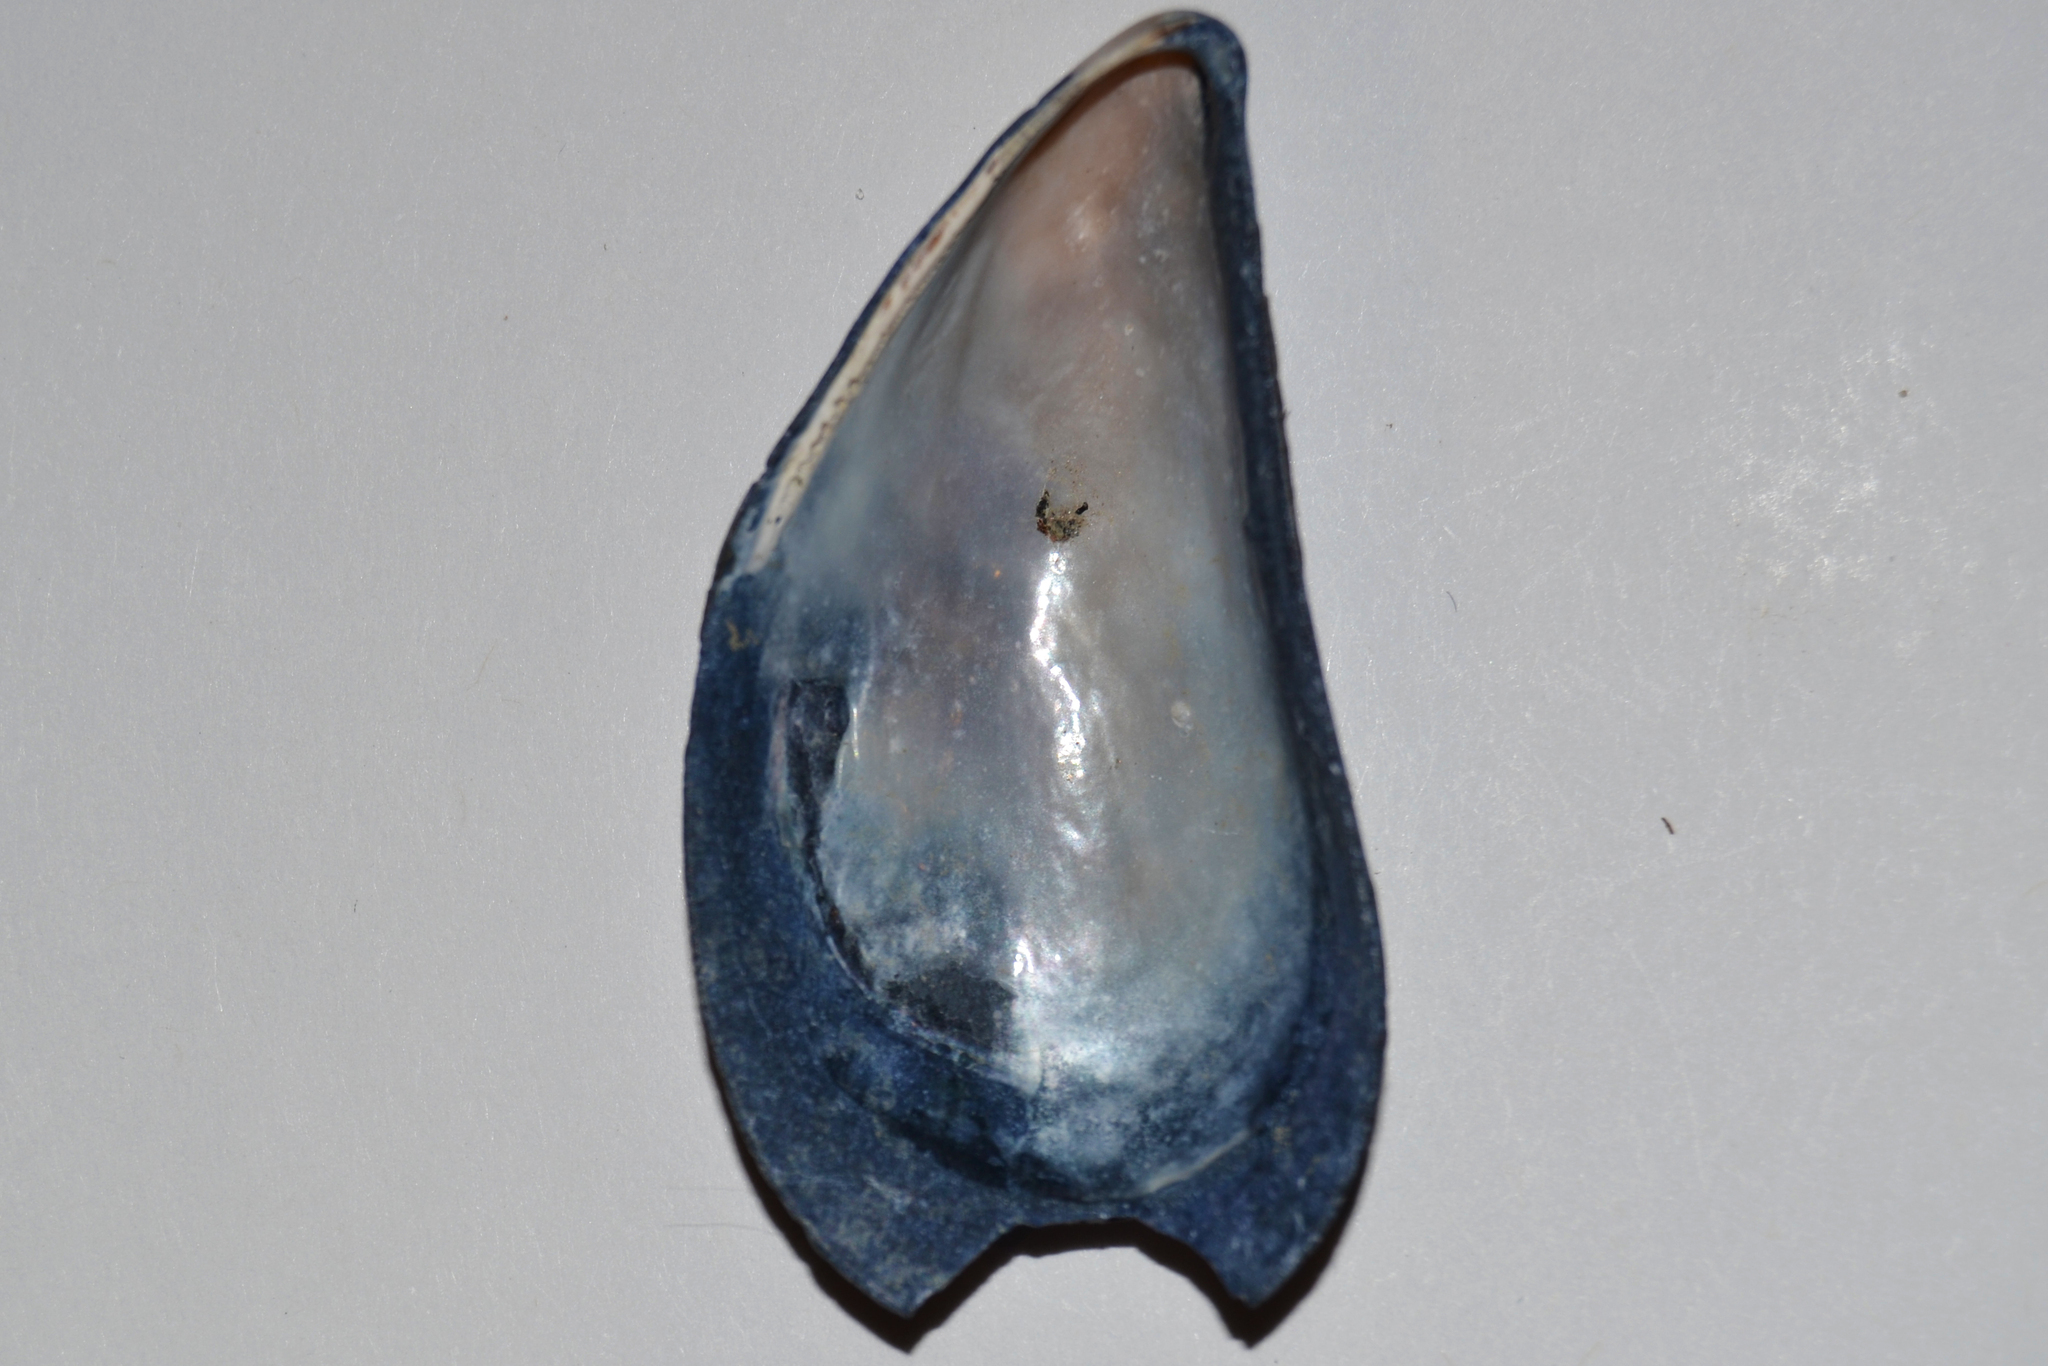 Image of Common mussel